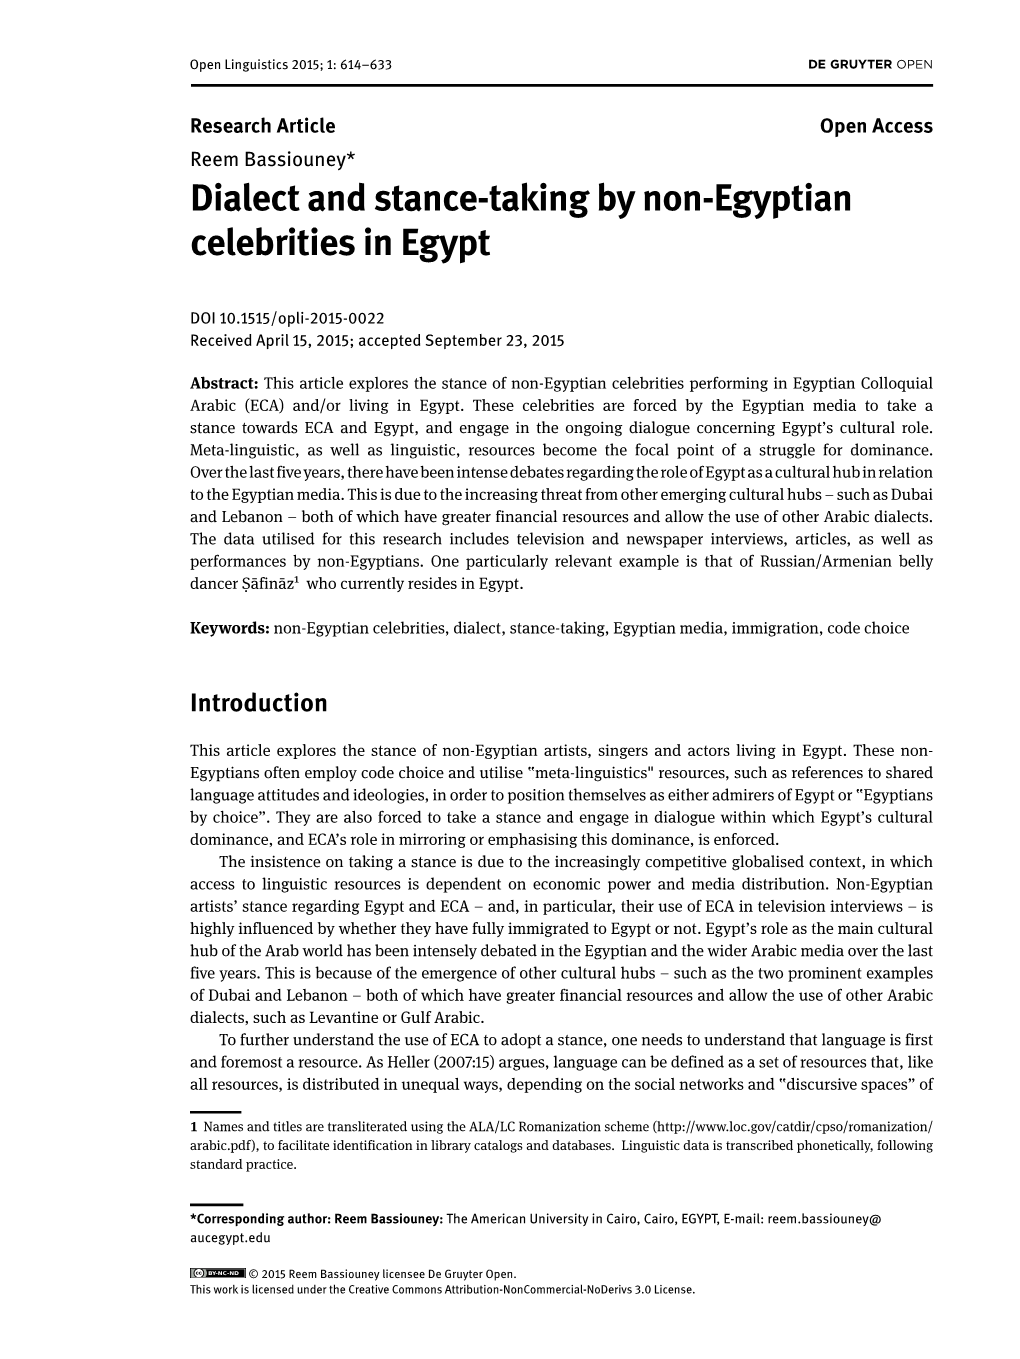 Dialect and Stance-Taking by Non-Egyptian Celebrities in Egypt